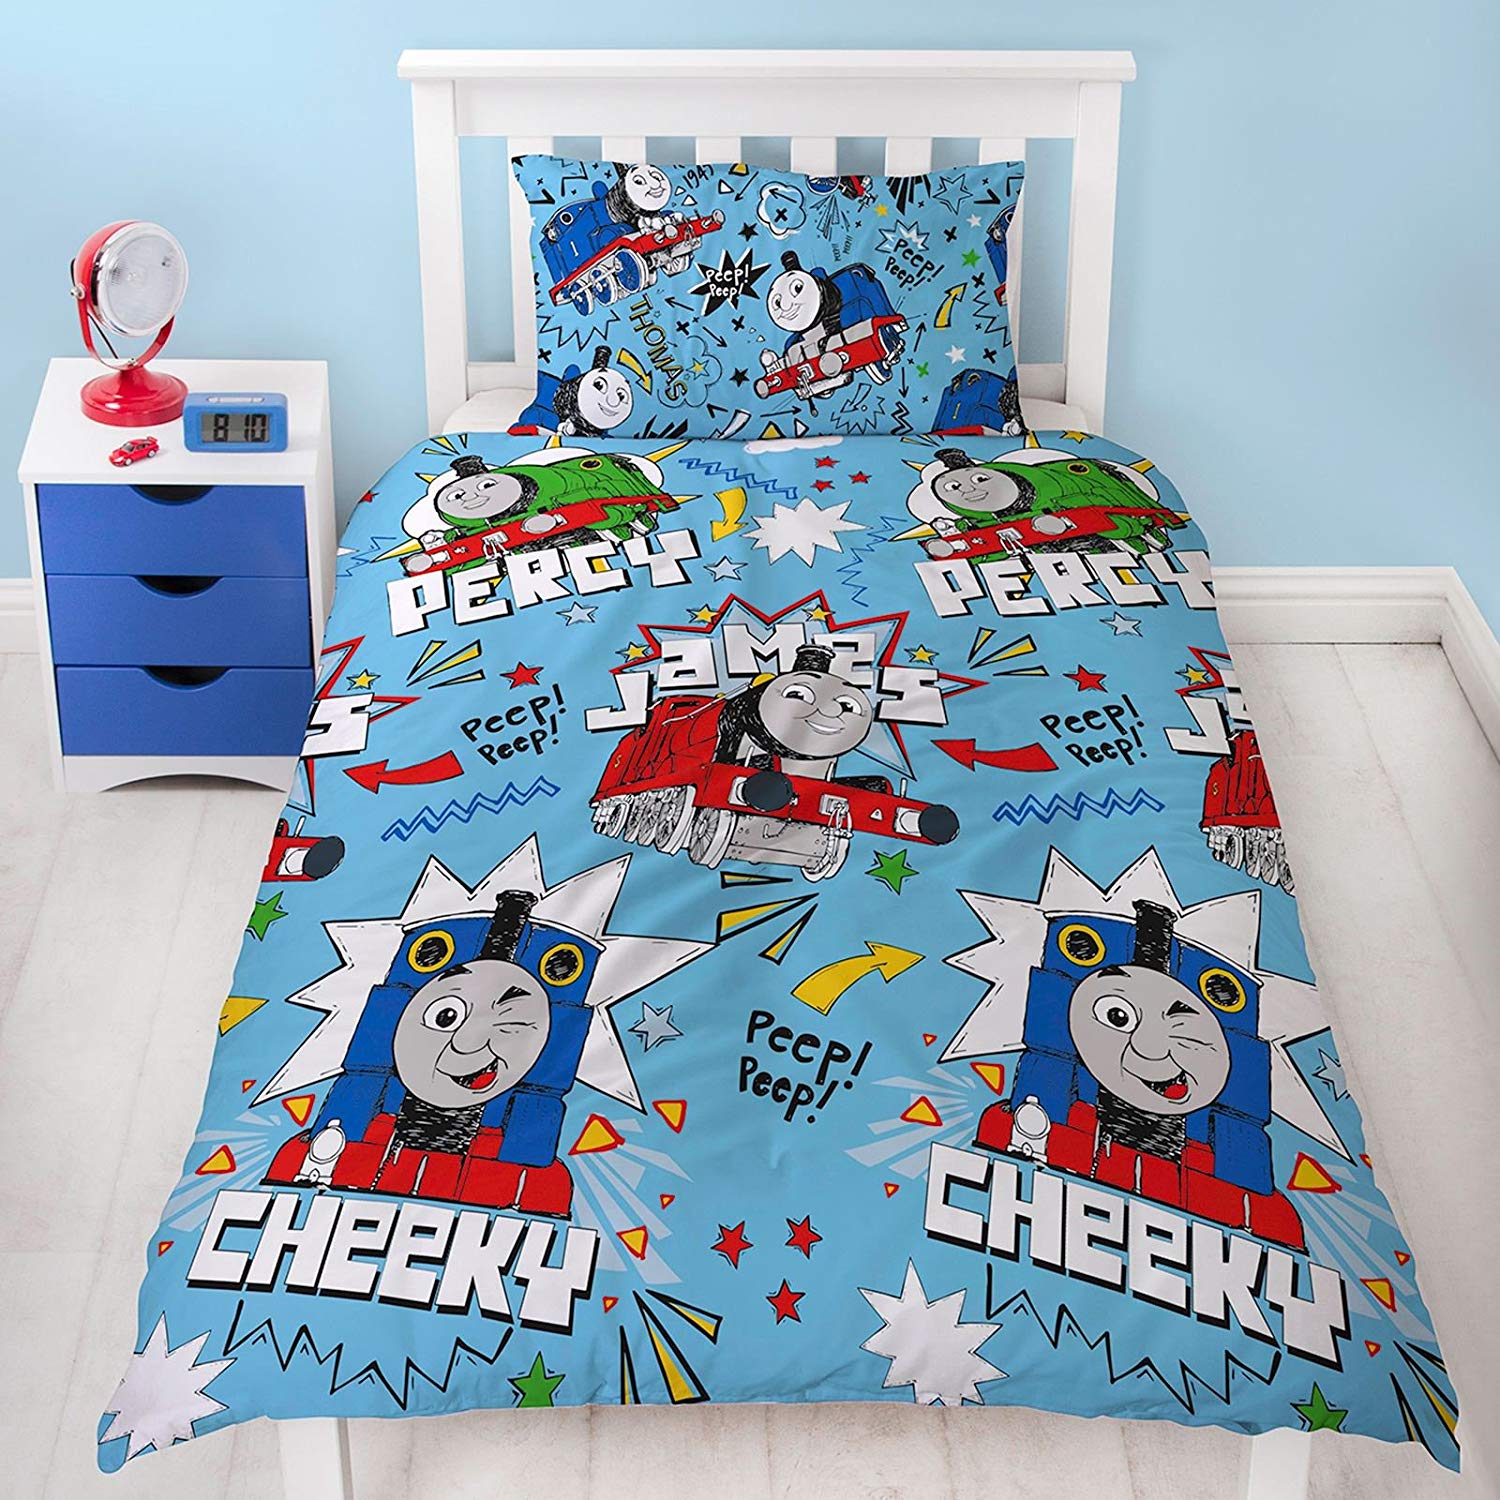 Thomas & Friends 'Sketchbook' Rotary Single Bed Duvet Quilt Cover Set